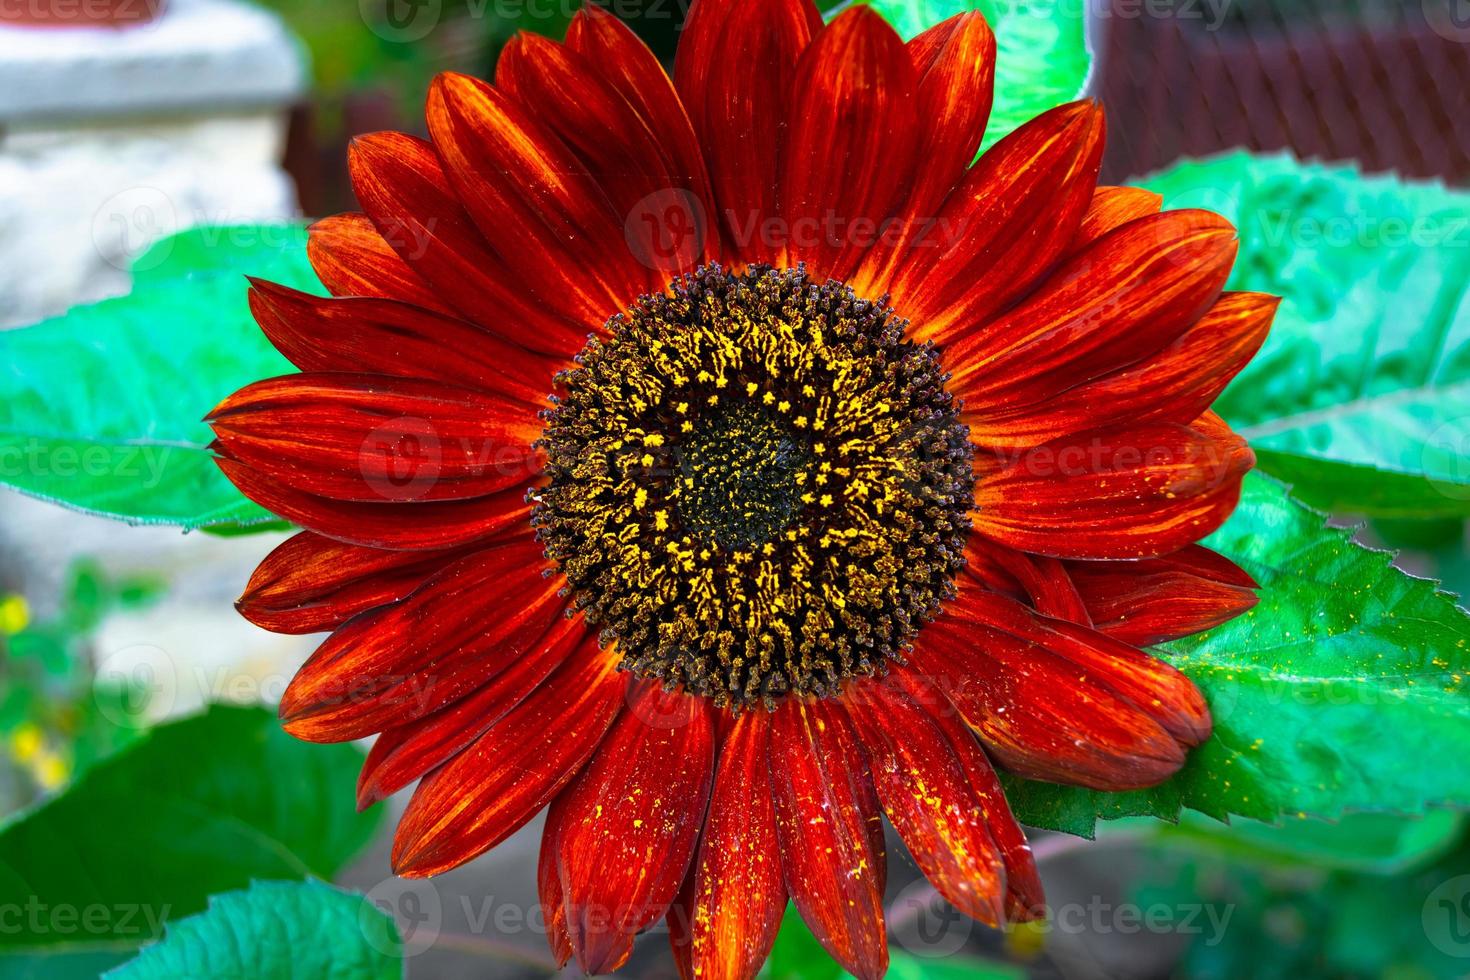 A beautiful decorative dark red sunflower blooming in the garden, dusty covered with yellow pollen. photo